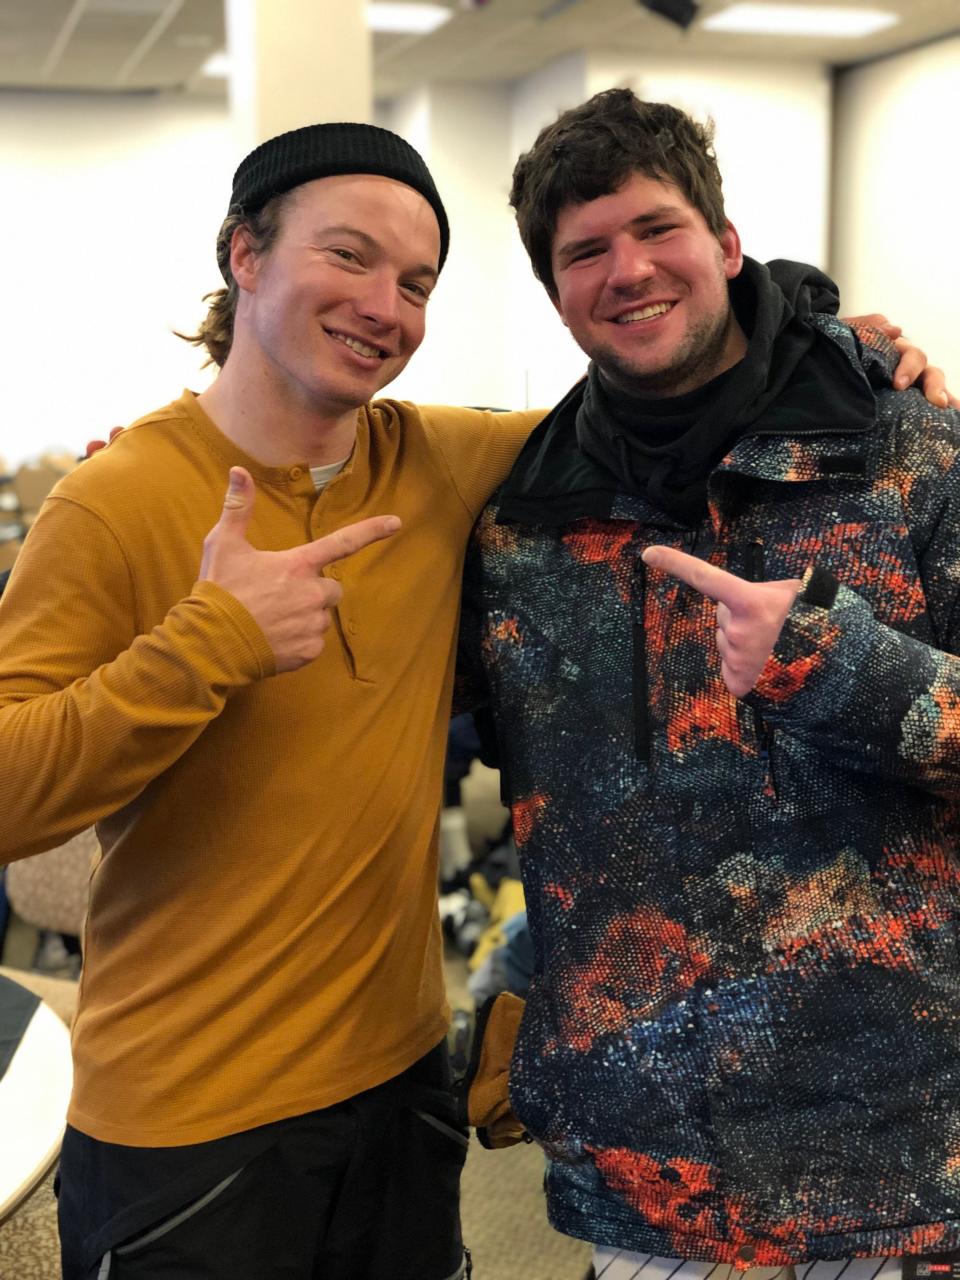 Jake Petsch, right, worked as a filmmaker with the U.S. Olympic Ski and Snowboard Team. He's pictured here with David Wise, a two-time gold medalist.